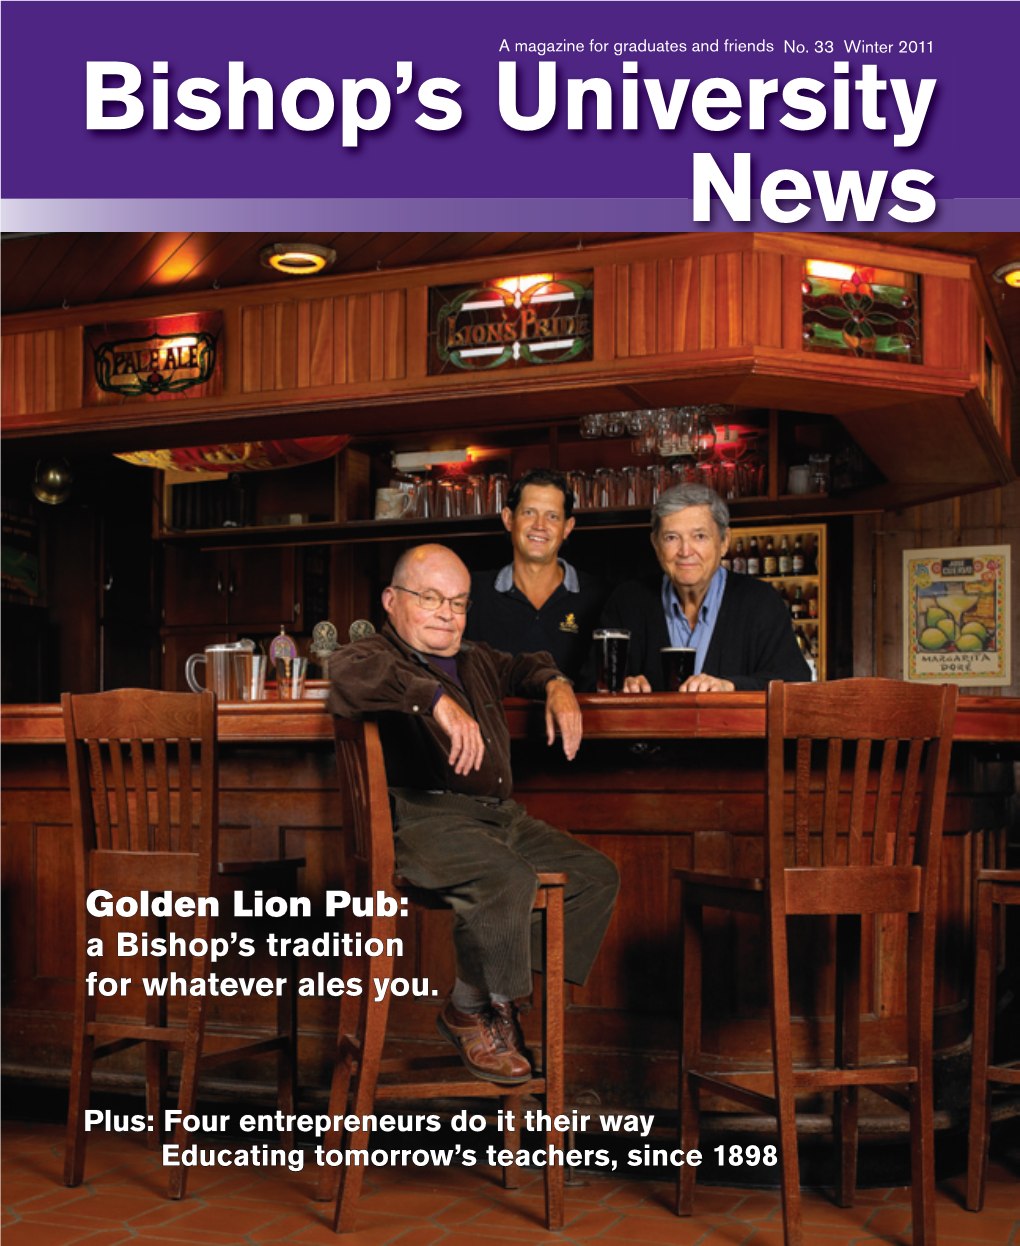 Golden Lion Pub: a Bishop’S Tradition for Whatever Ales You